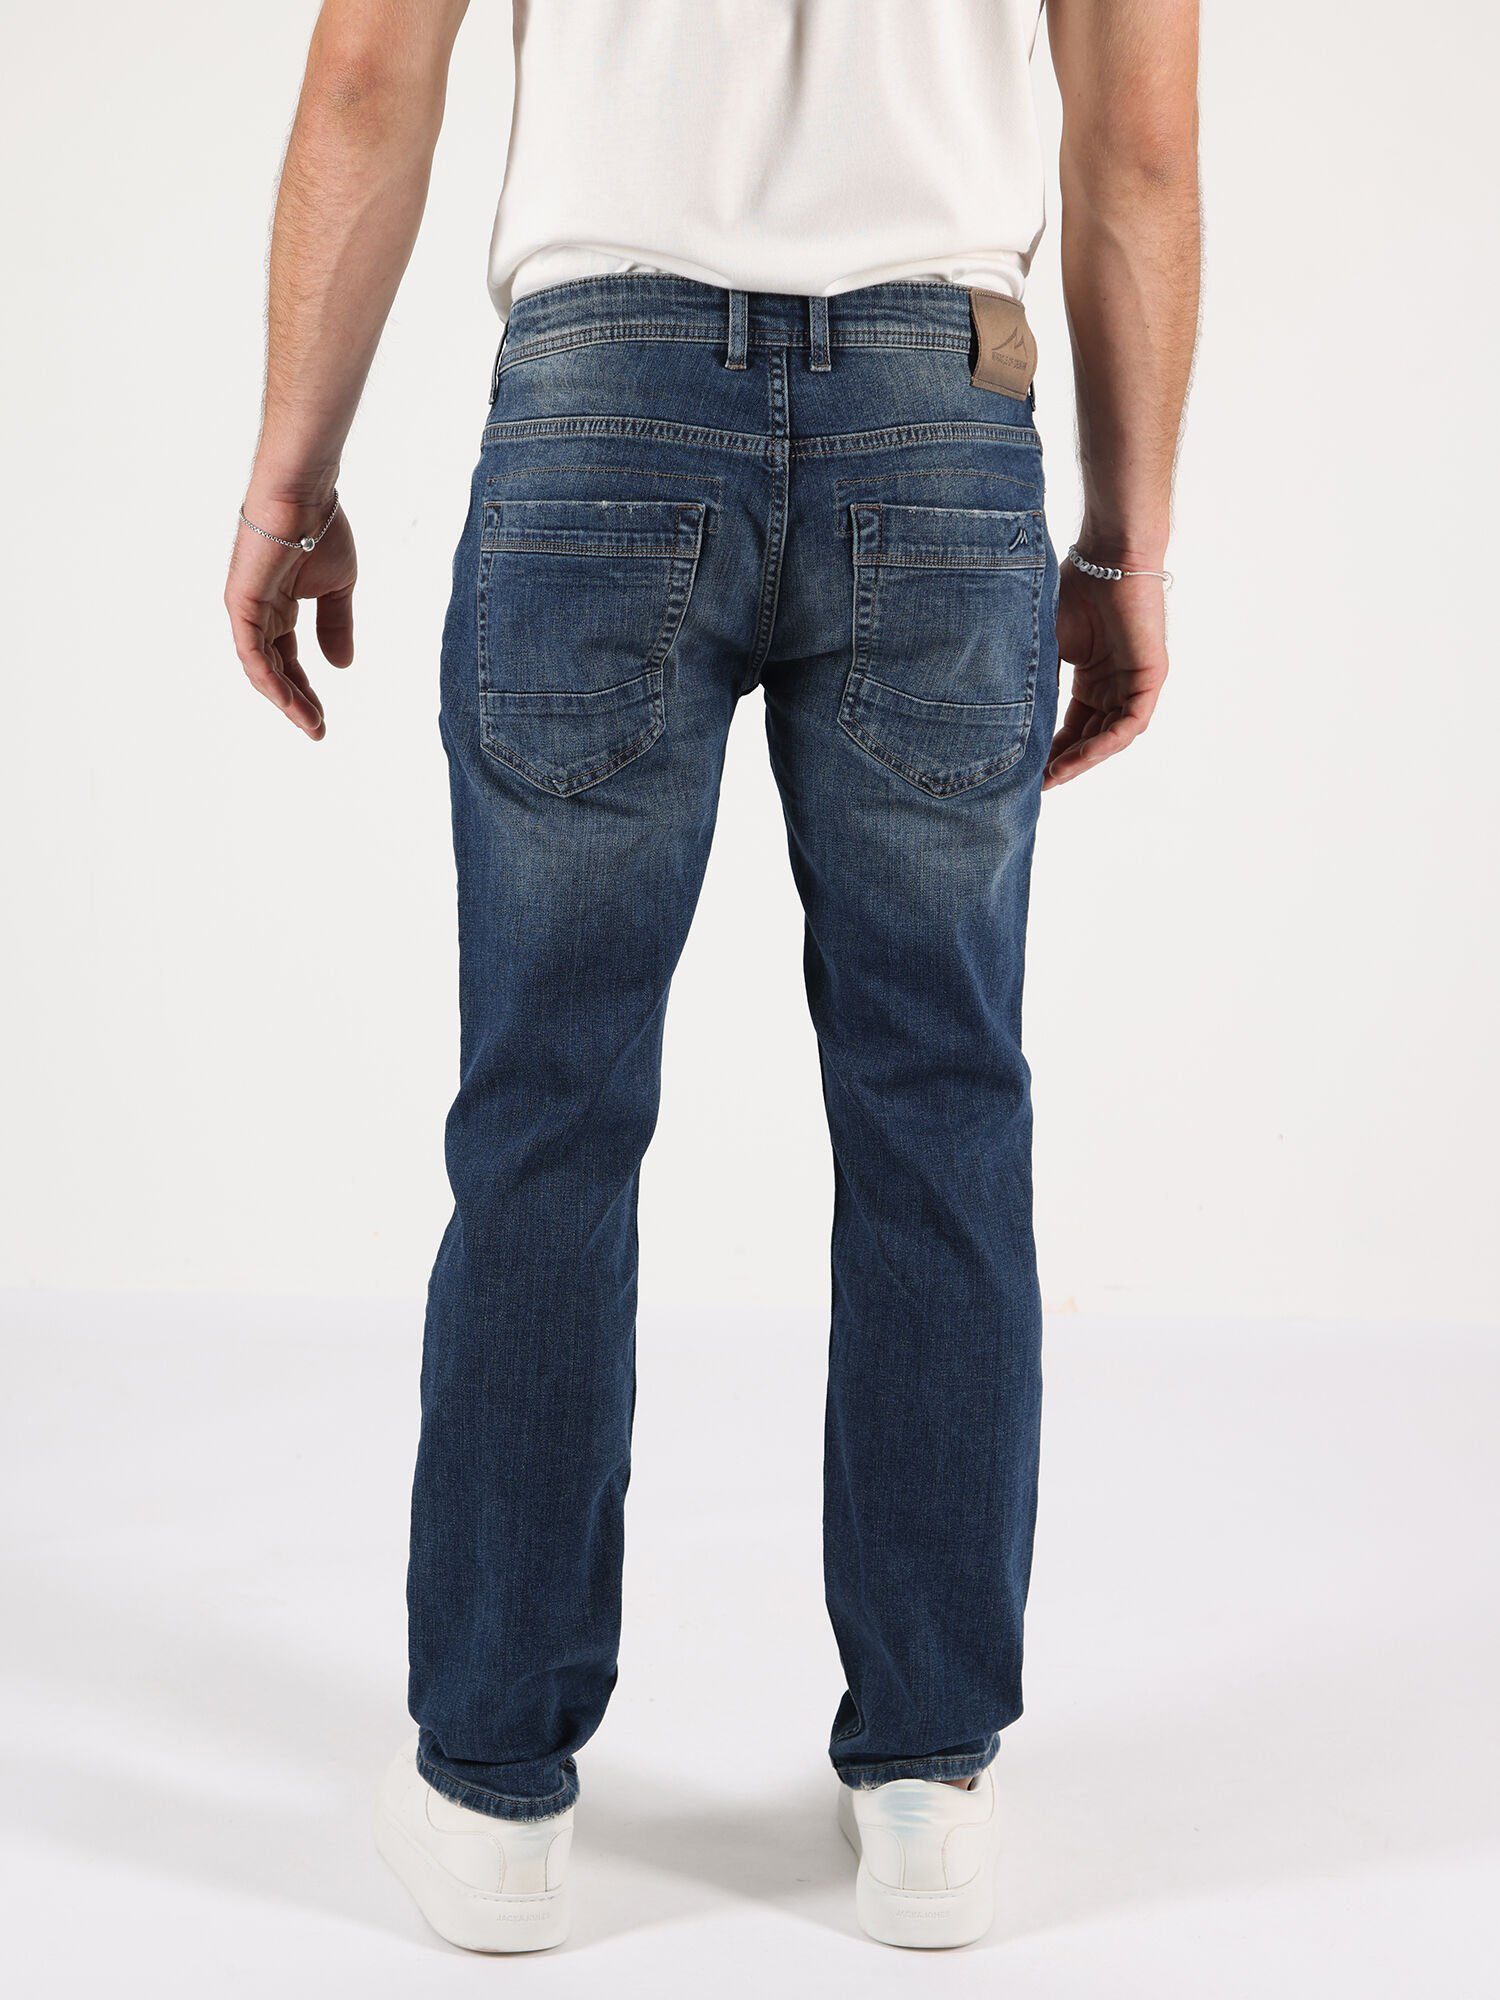 Miracle Denim of Relax-fit-Jeans Rent Five-Pocket-Design Blue Thomas im